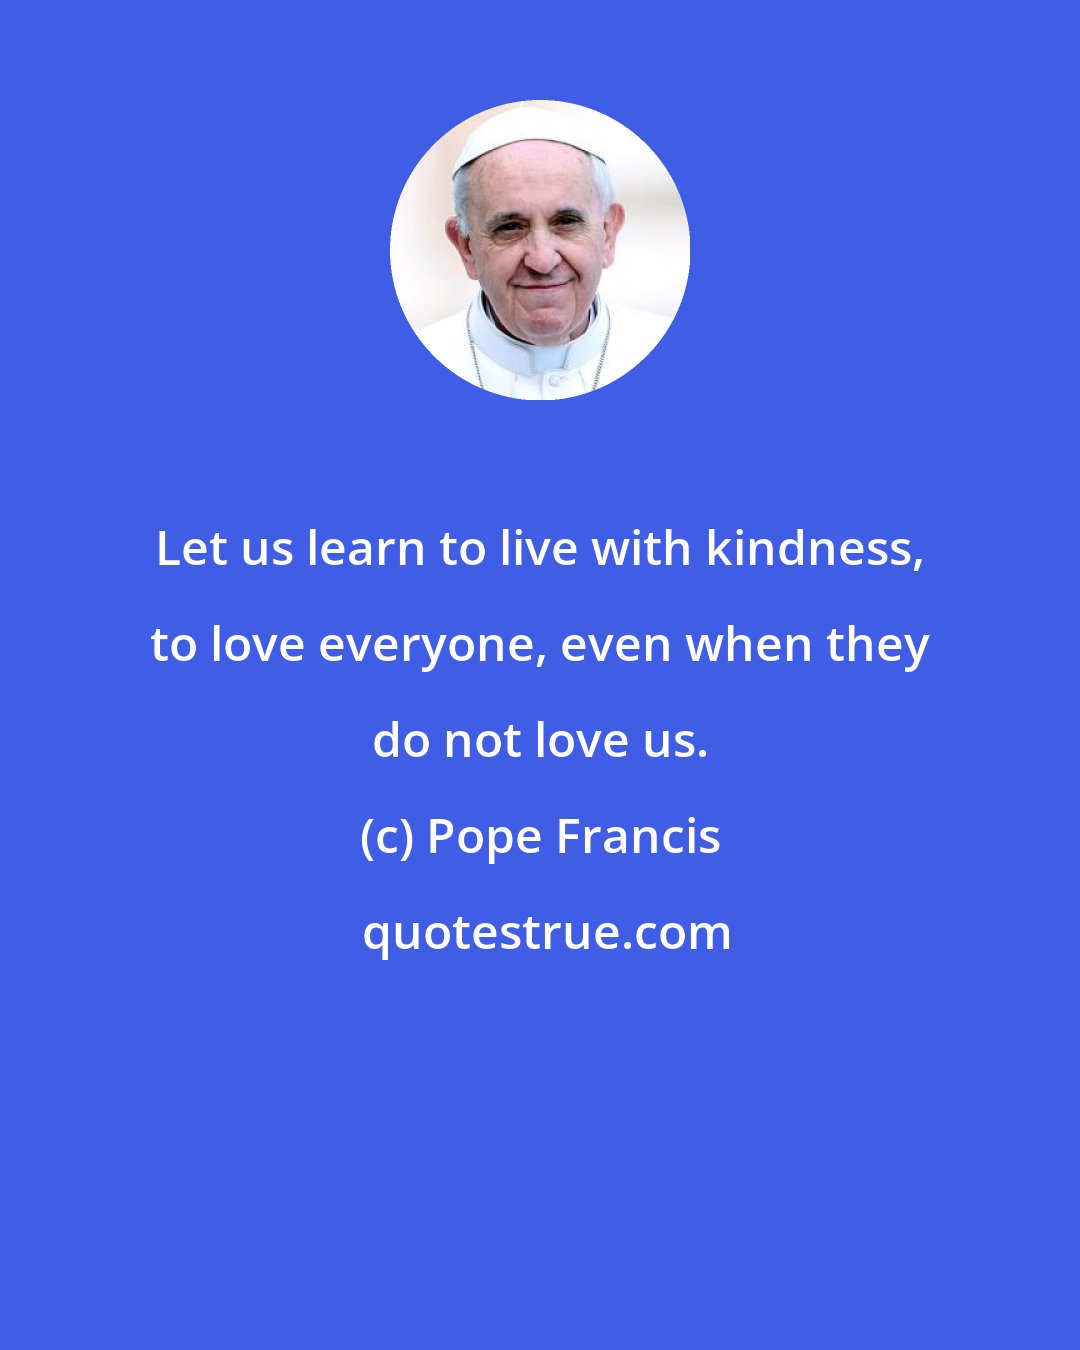 Pope Francis: Let us learn to live with kindness, to love everyone, even when they do not love us.